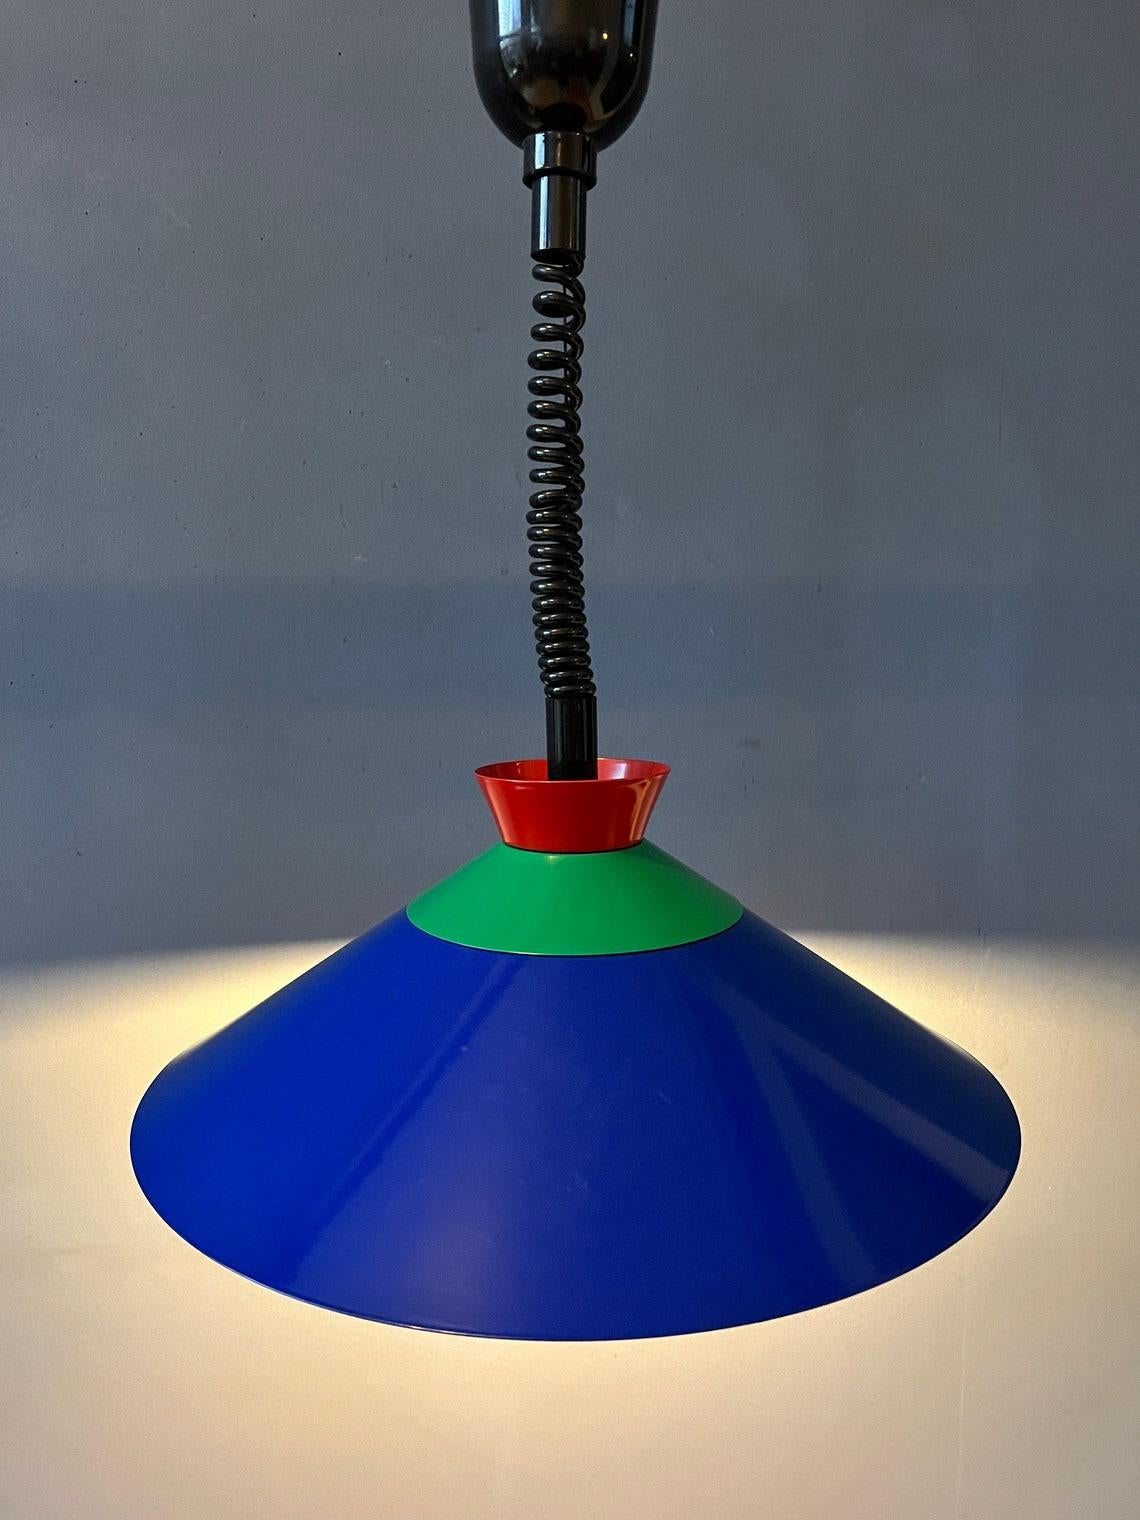 Vintage Memphis pendant in blue, green and red colour. The height of the lamp can easily be adjusted with the suspension mechanism. The lamp requires one E26/27 (standard) lightbulb.

Additional information:
Materials: Metal, plastic
Period: